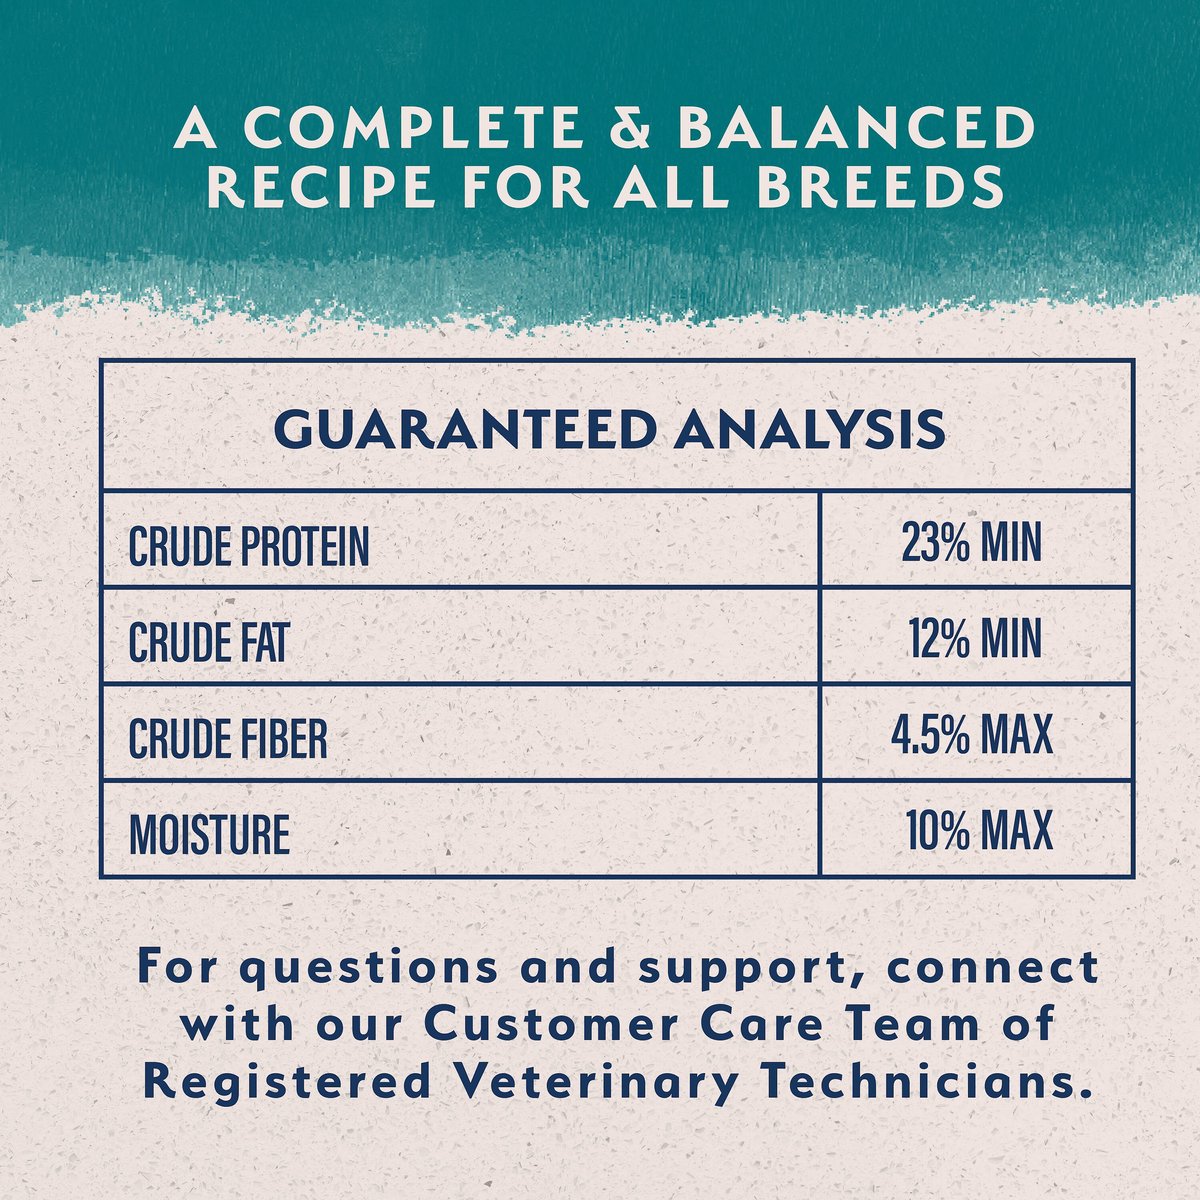 Natural Balance Limited Ingredient Diet Adult Dry Dog Food with Healthy Grains Chicken  Dog Food  | PetMax Canada